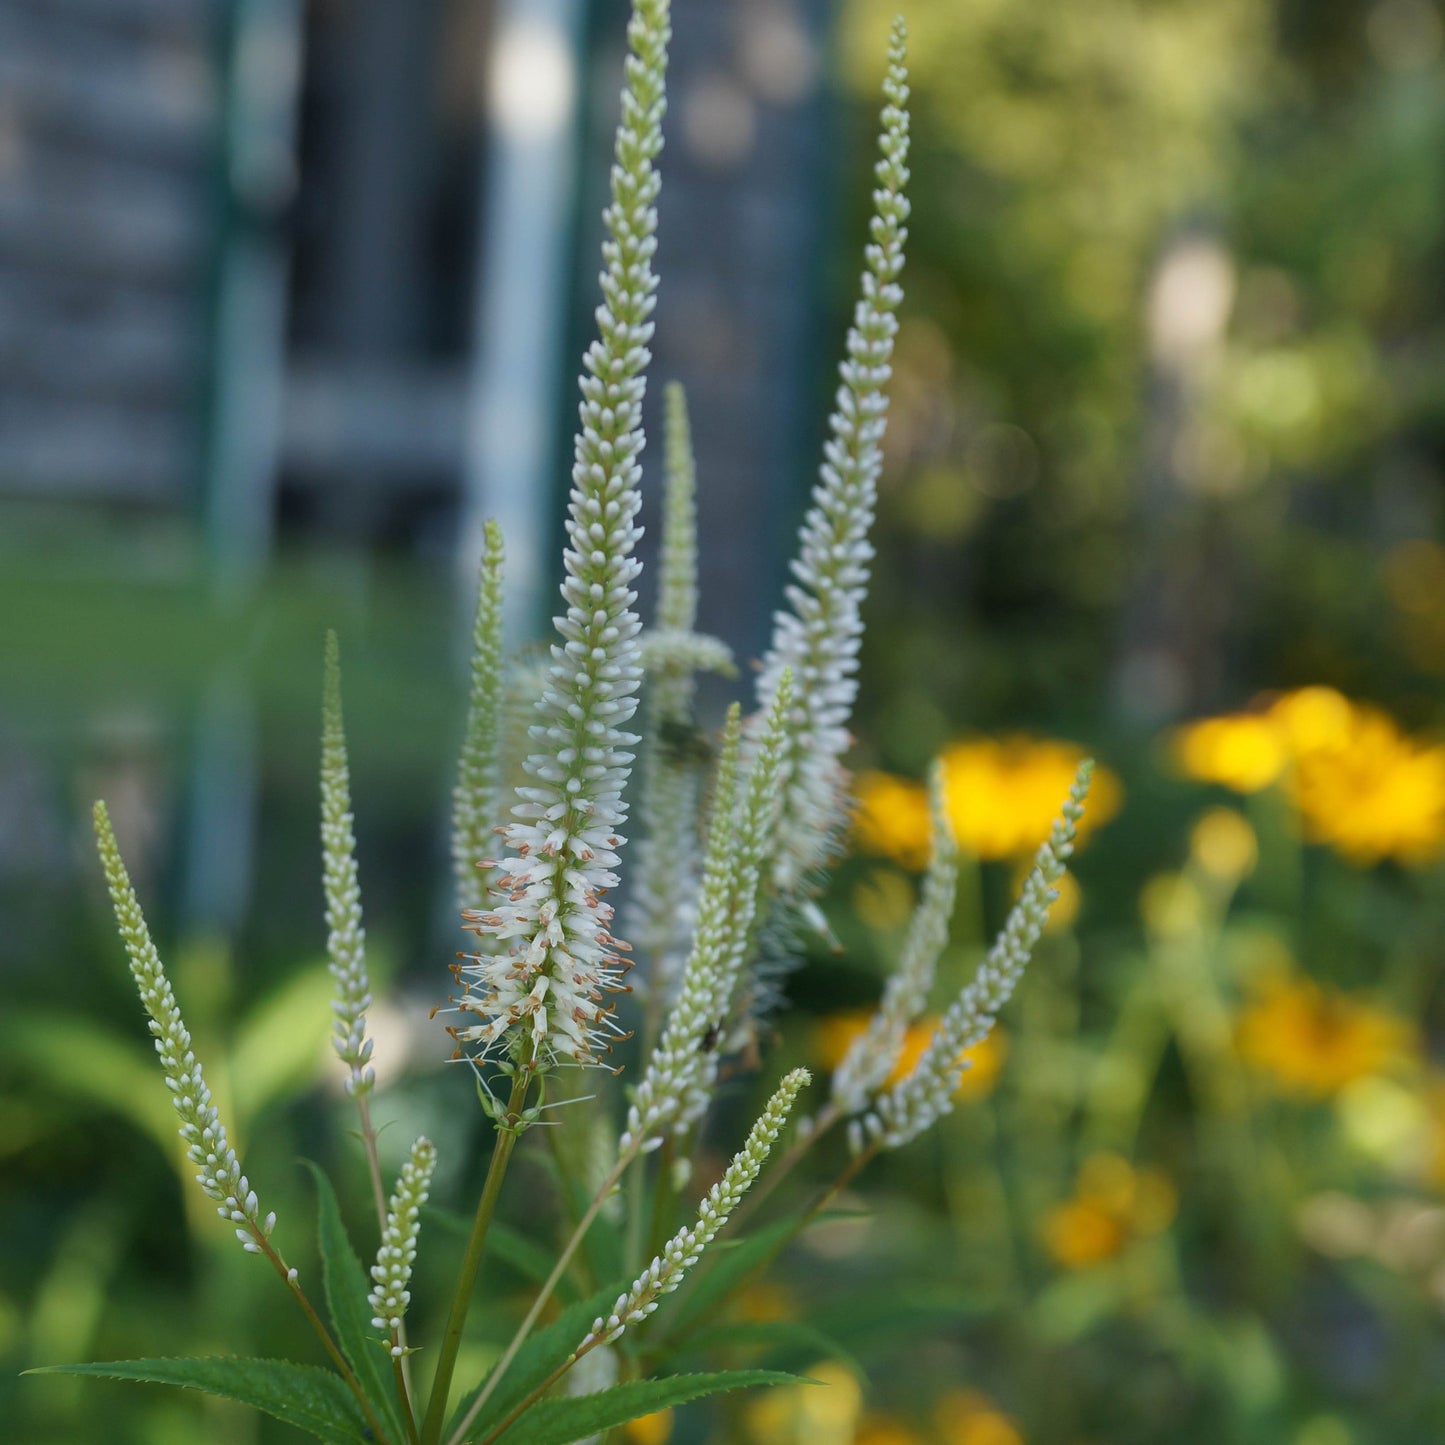 Culver's-root (Veronicastrum virginicum) In midsummer the tall white flower spikes burst into bloom and are covered with pollinating insects.